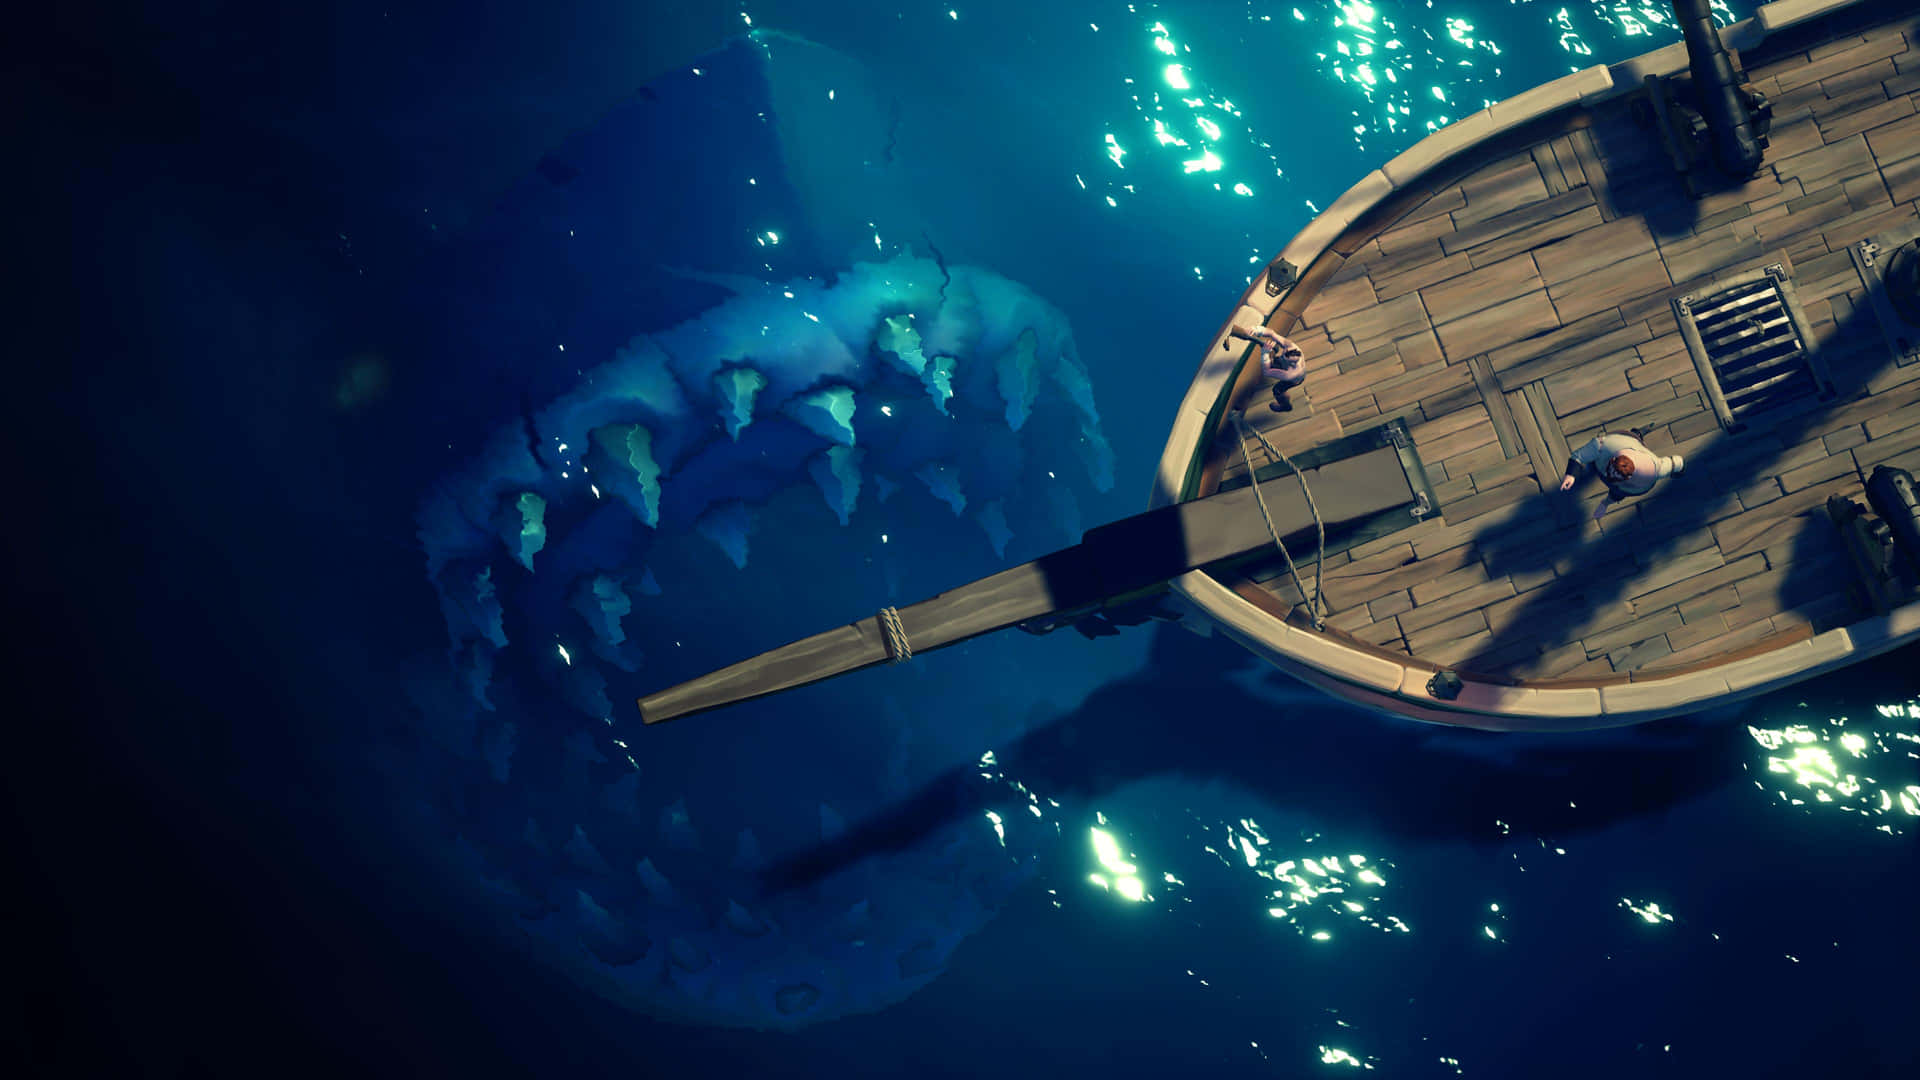 Captain and crew sailing the mysterious Sea of Thieves